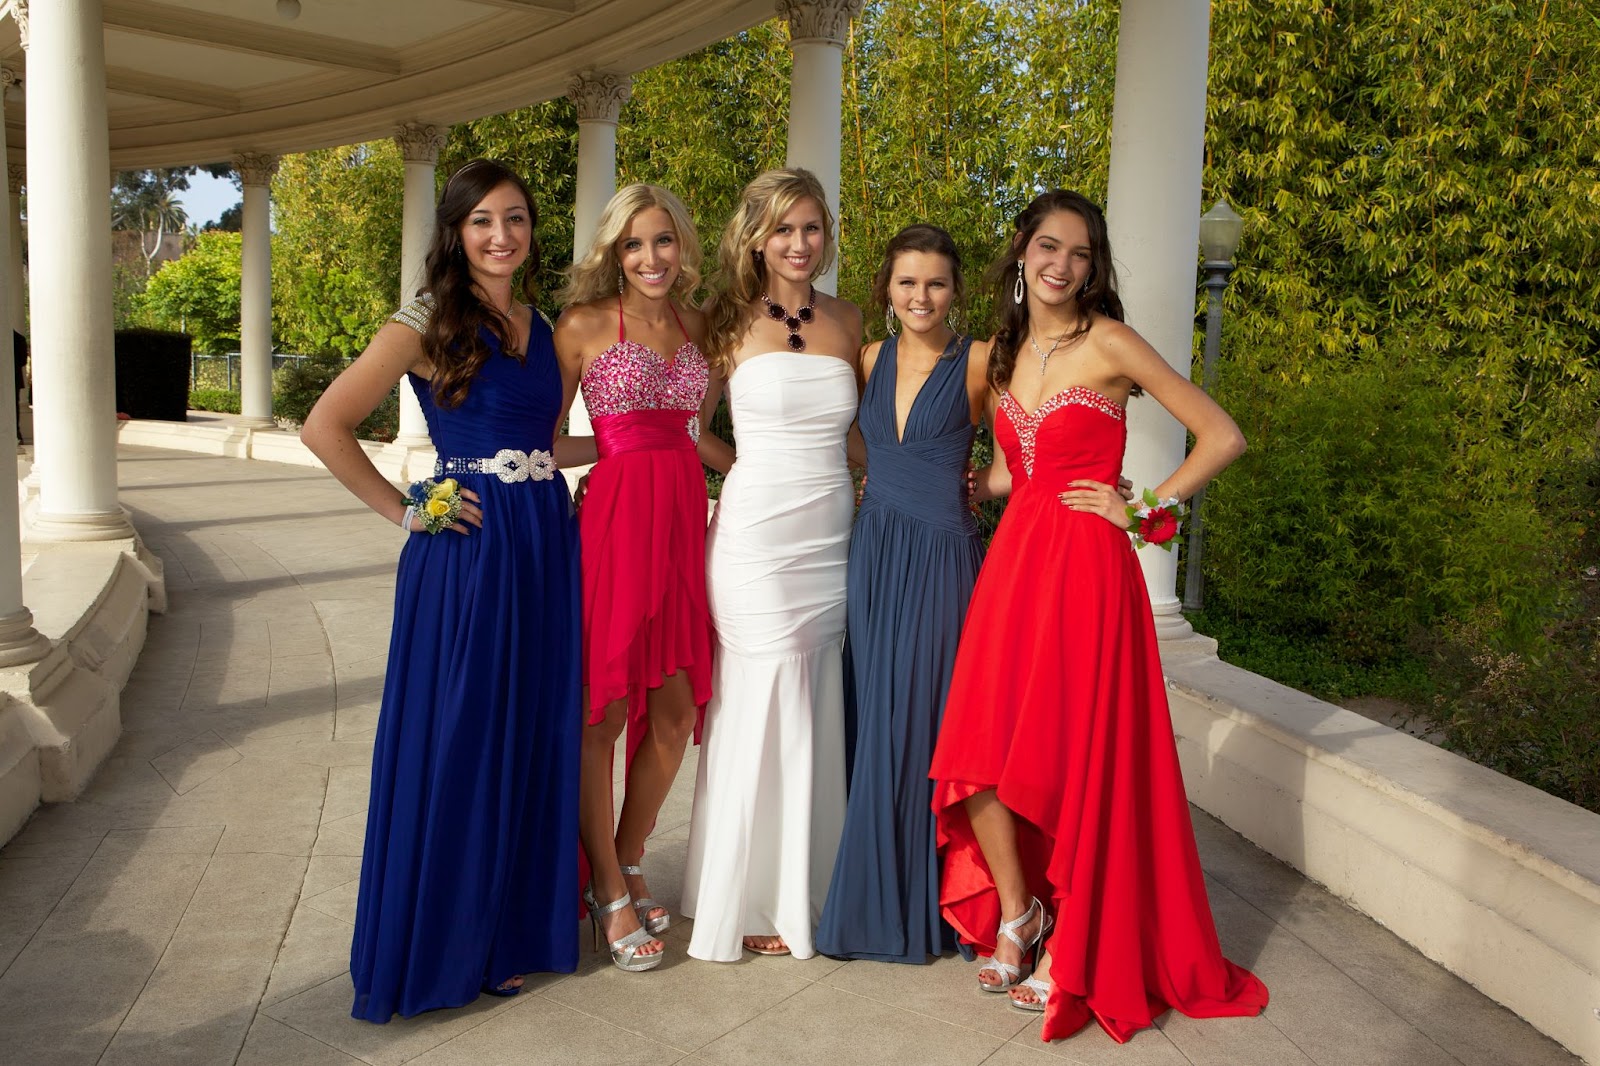 Find Your Style: 4 Perfect Prom Dress Fabrics